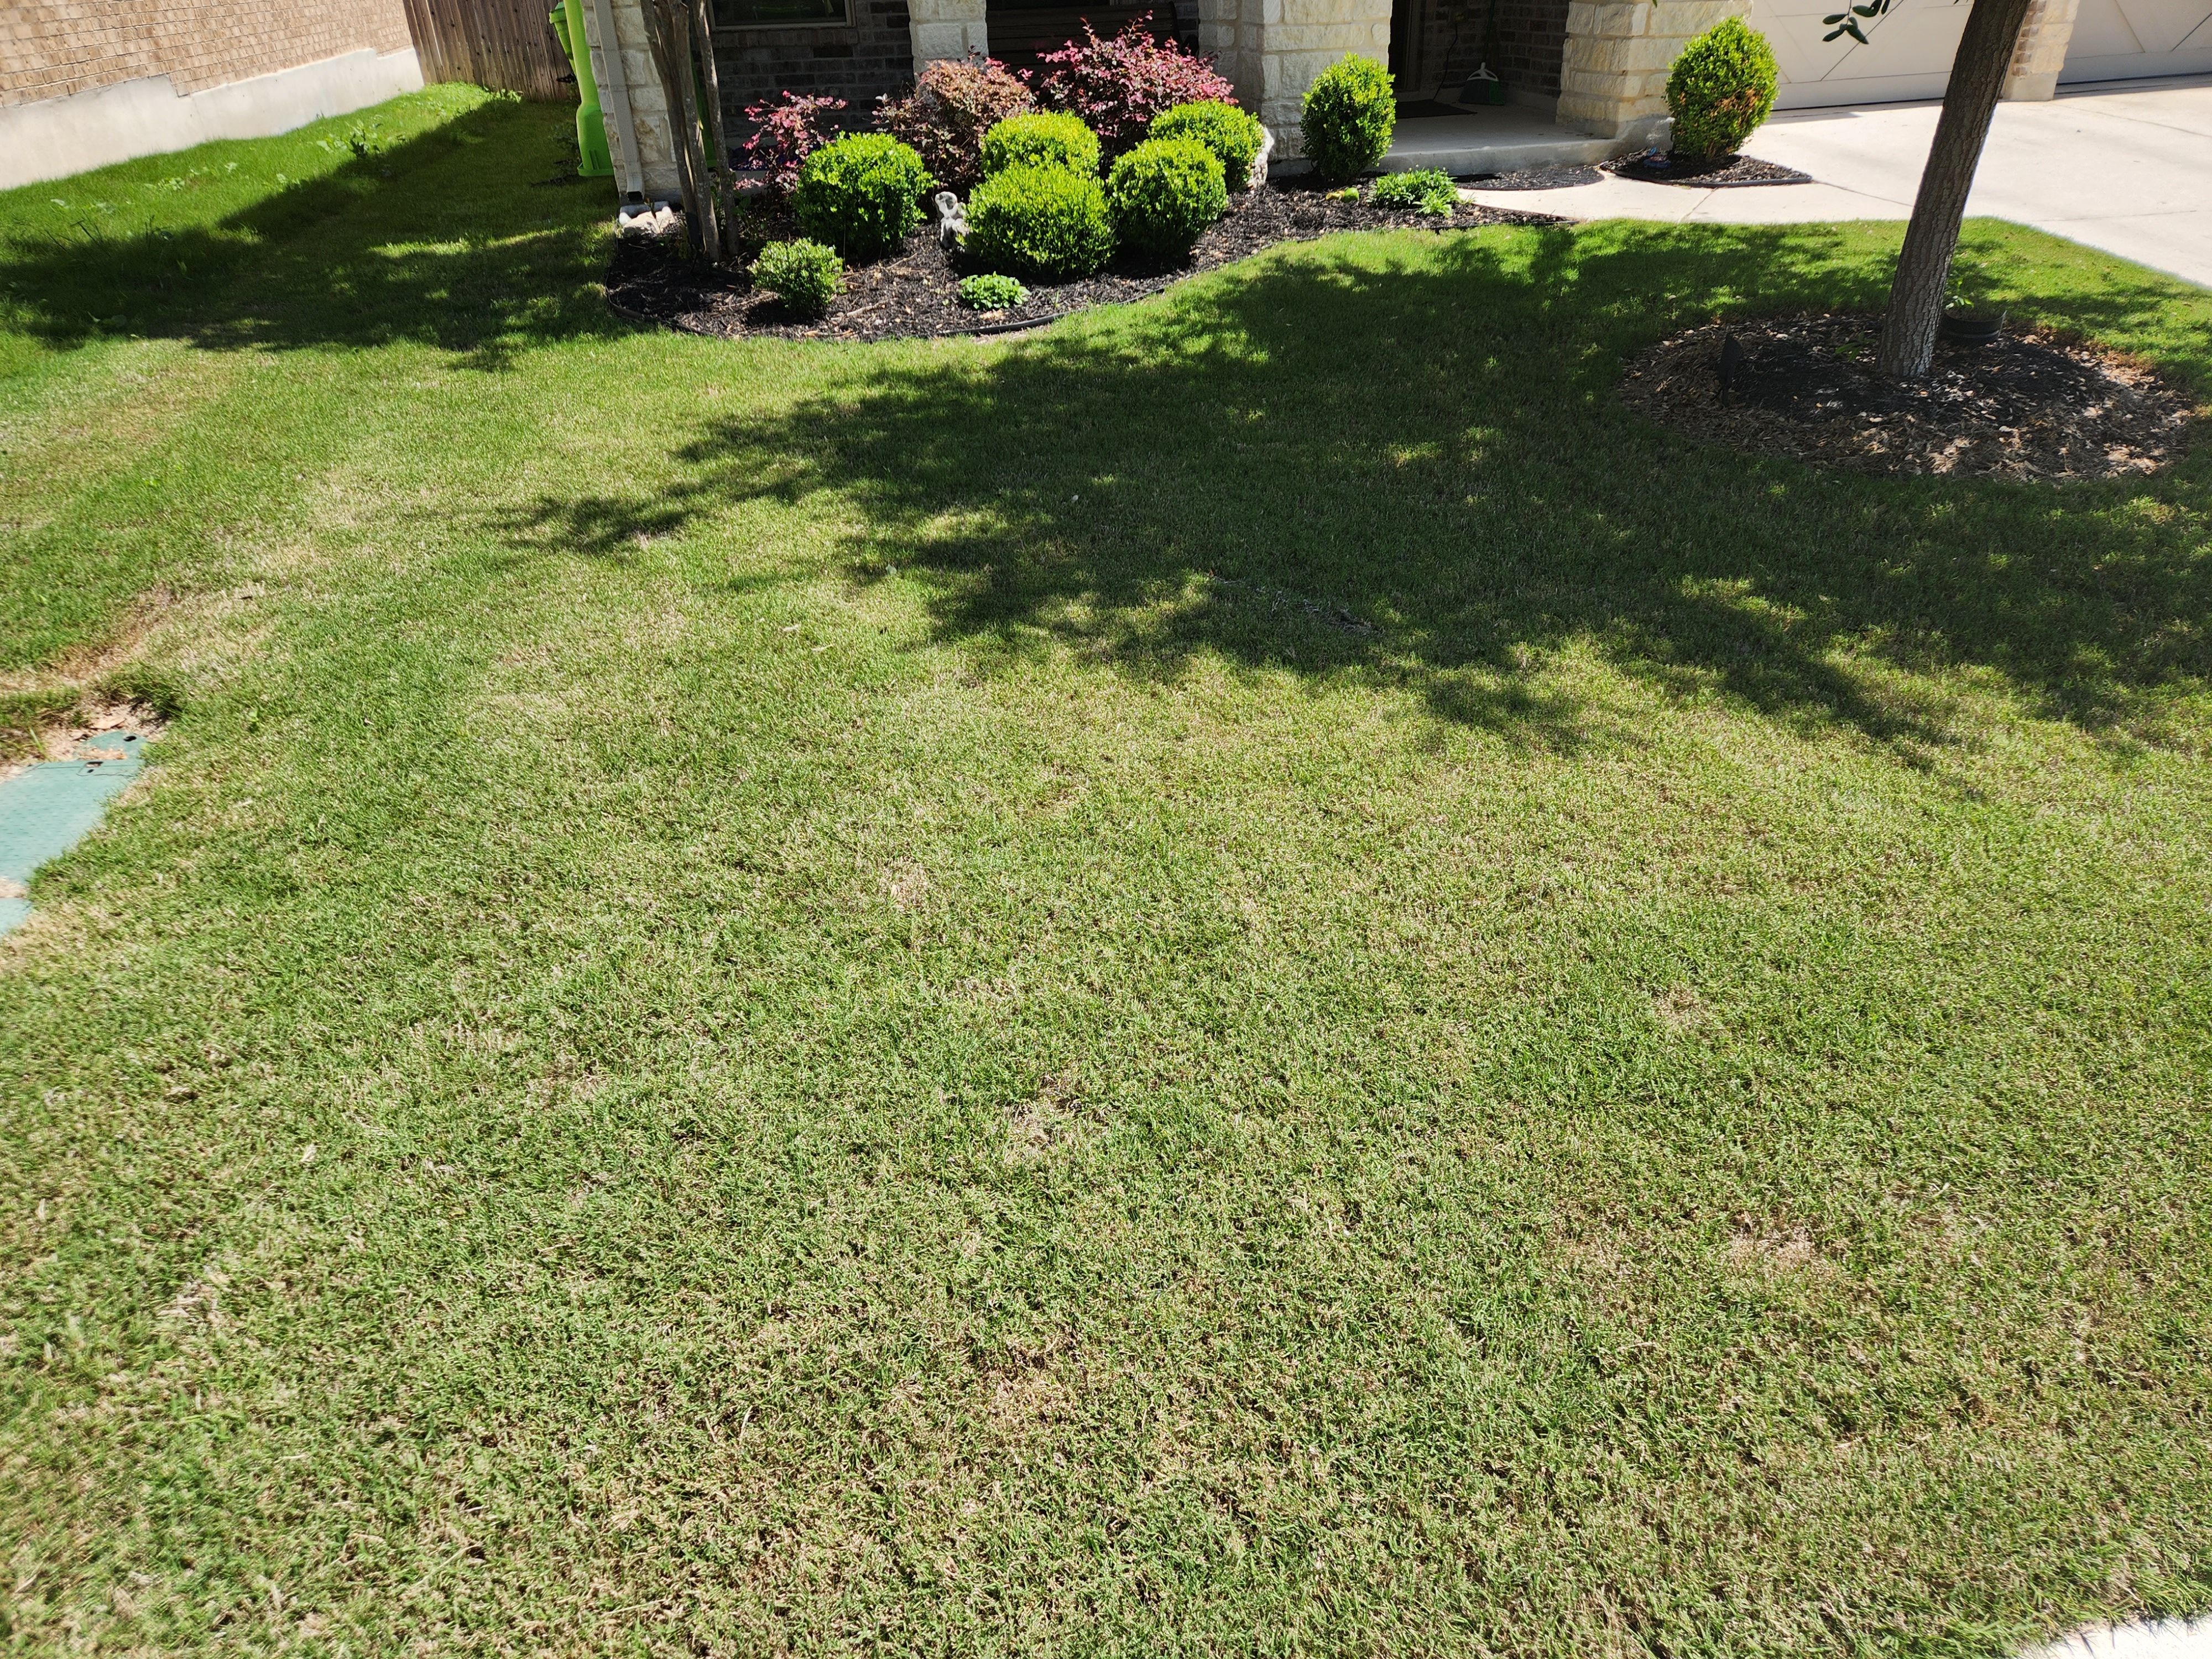 Tenant Responsiblies - Maintaining the Lawn and Treating for Weeds